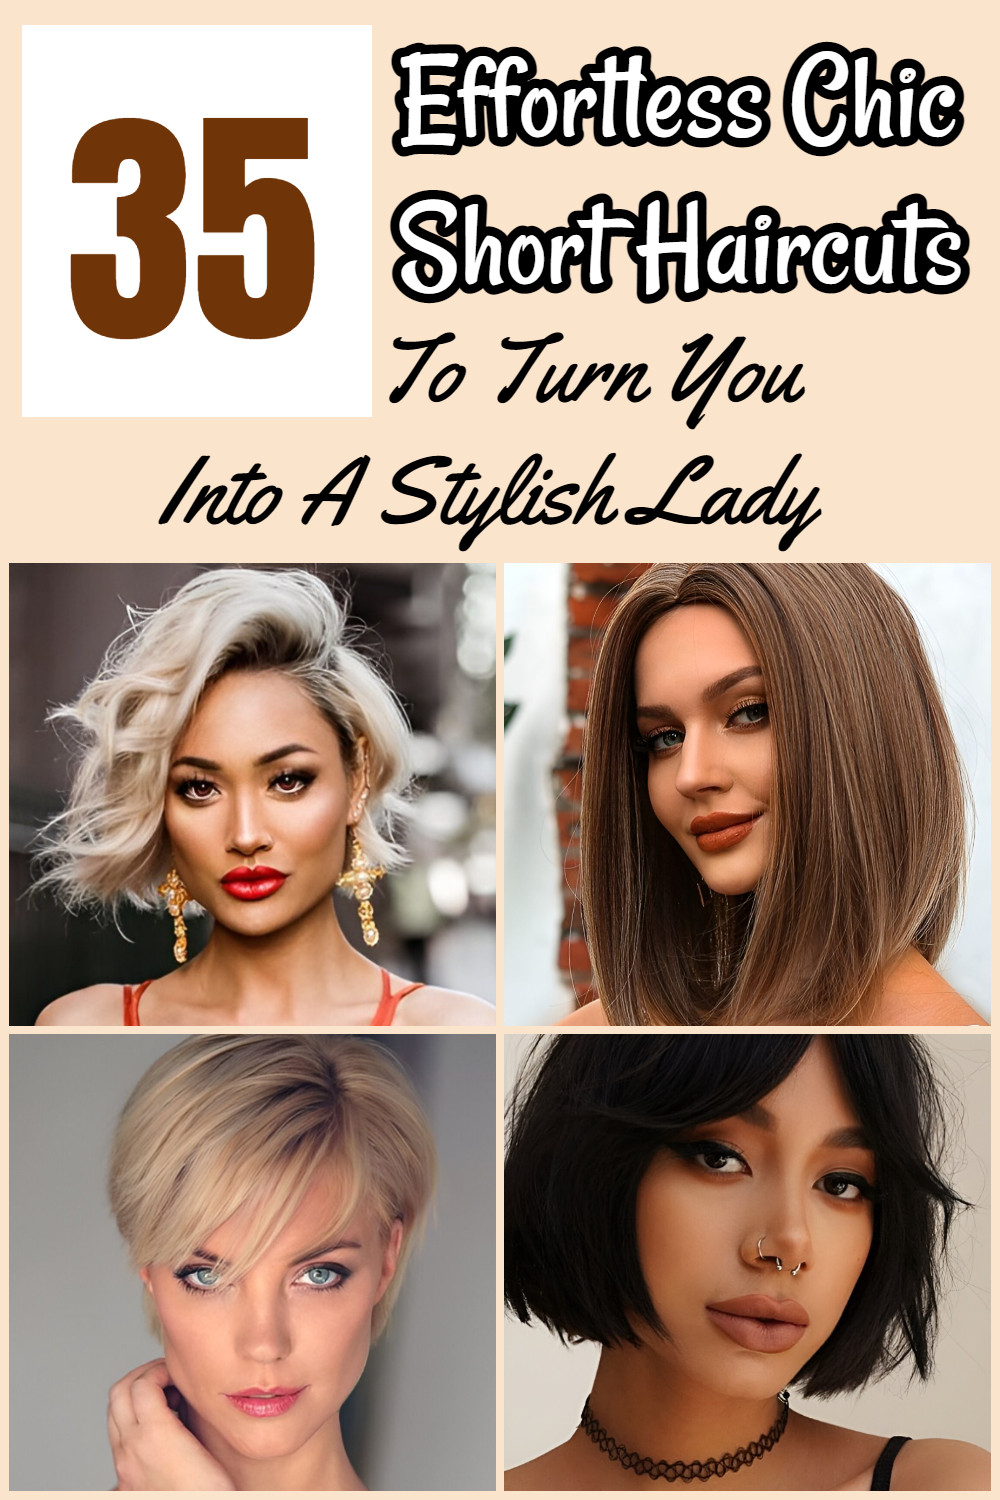 27 Effortless Chic Short Haircuts To Turn You Into A Stylish Lady